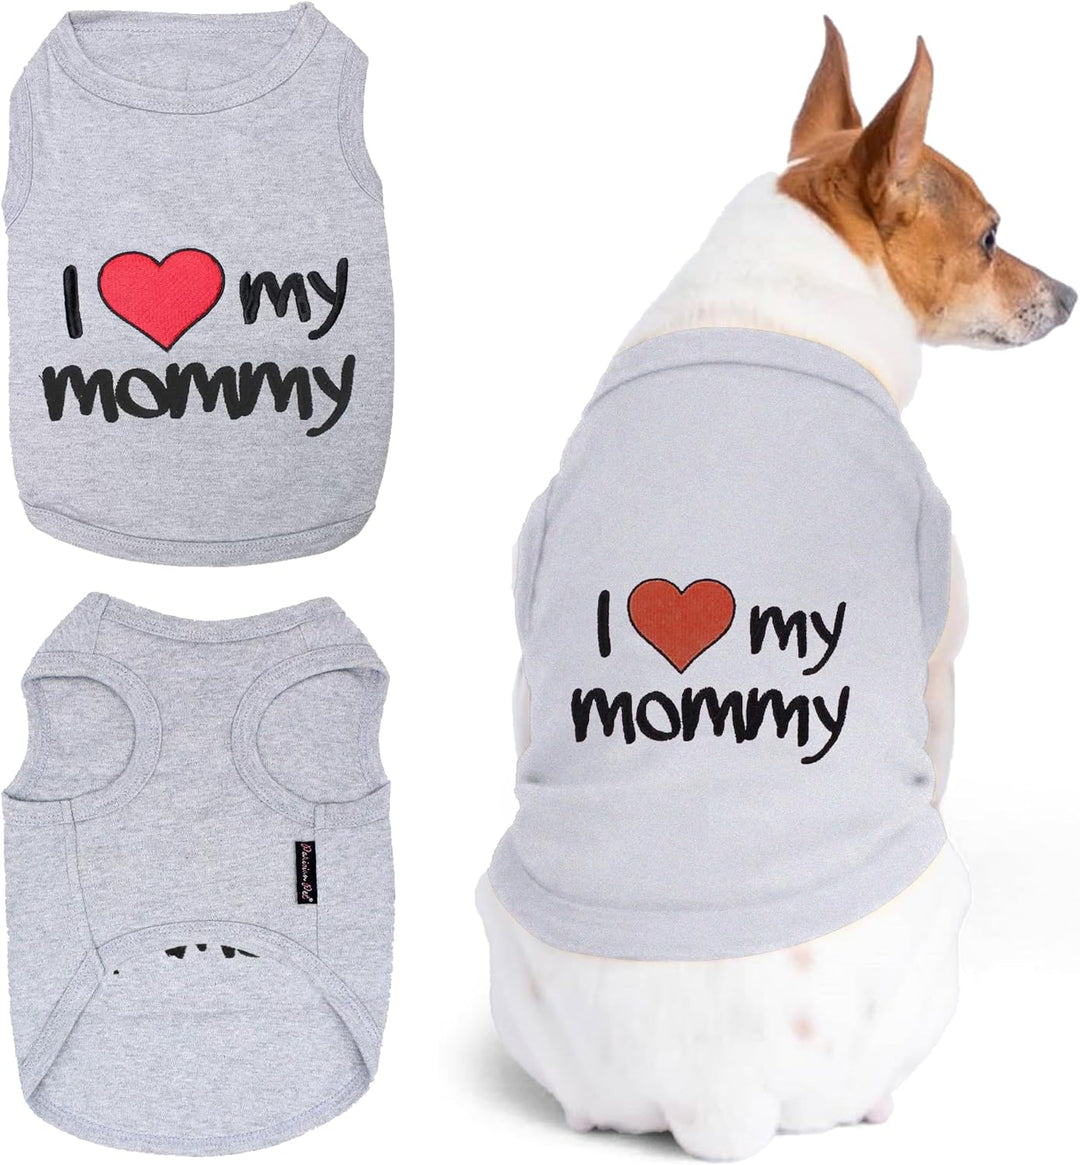 Unisex Dog T-Shirt with Embroidered 'I Love My Mommy' Words